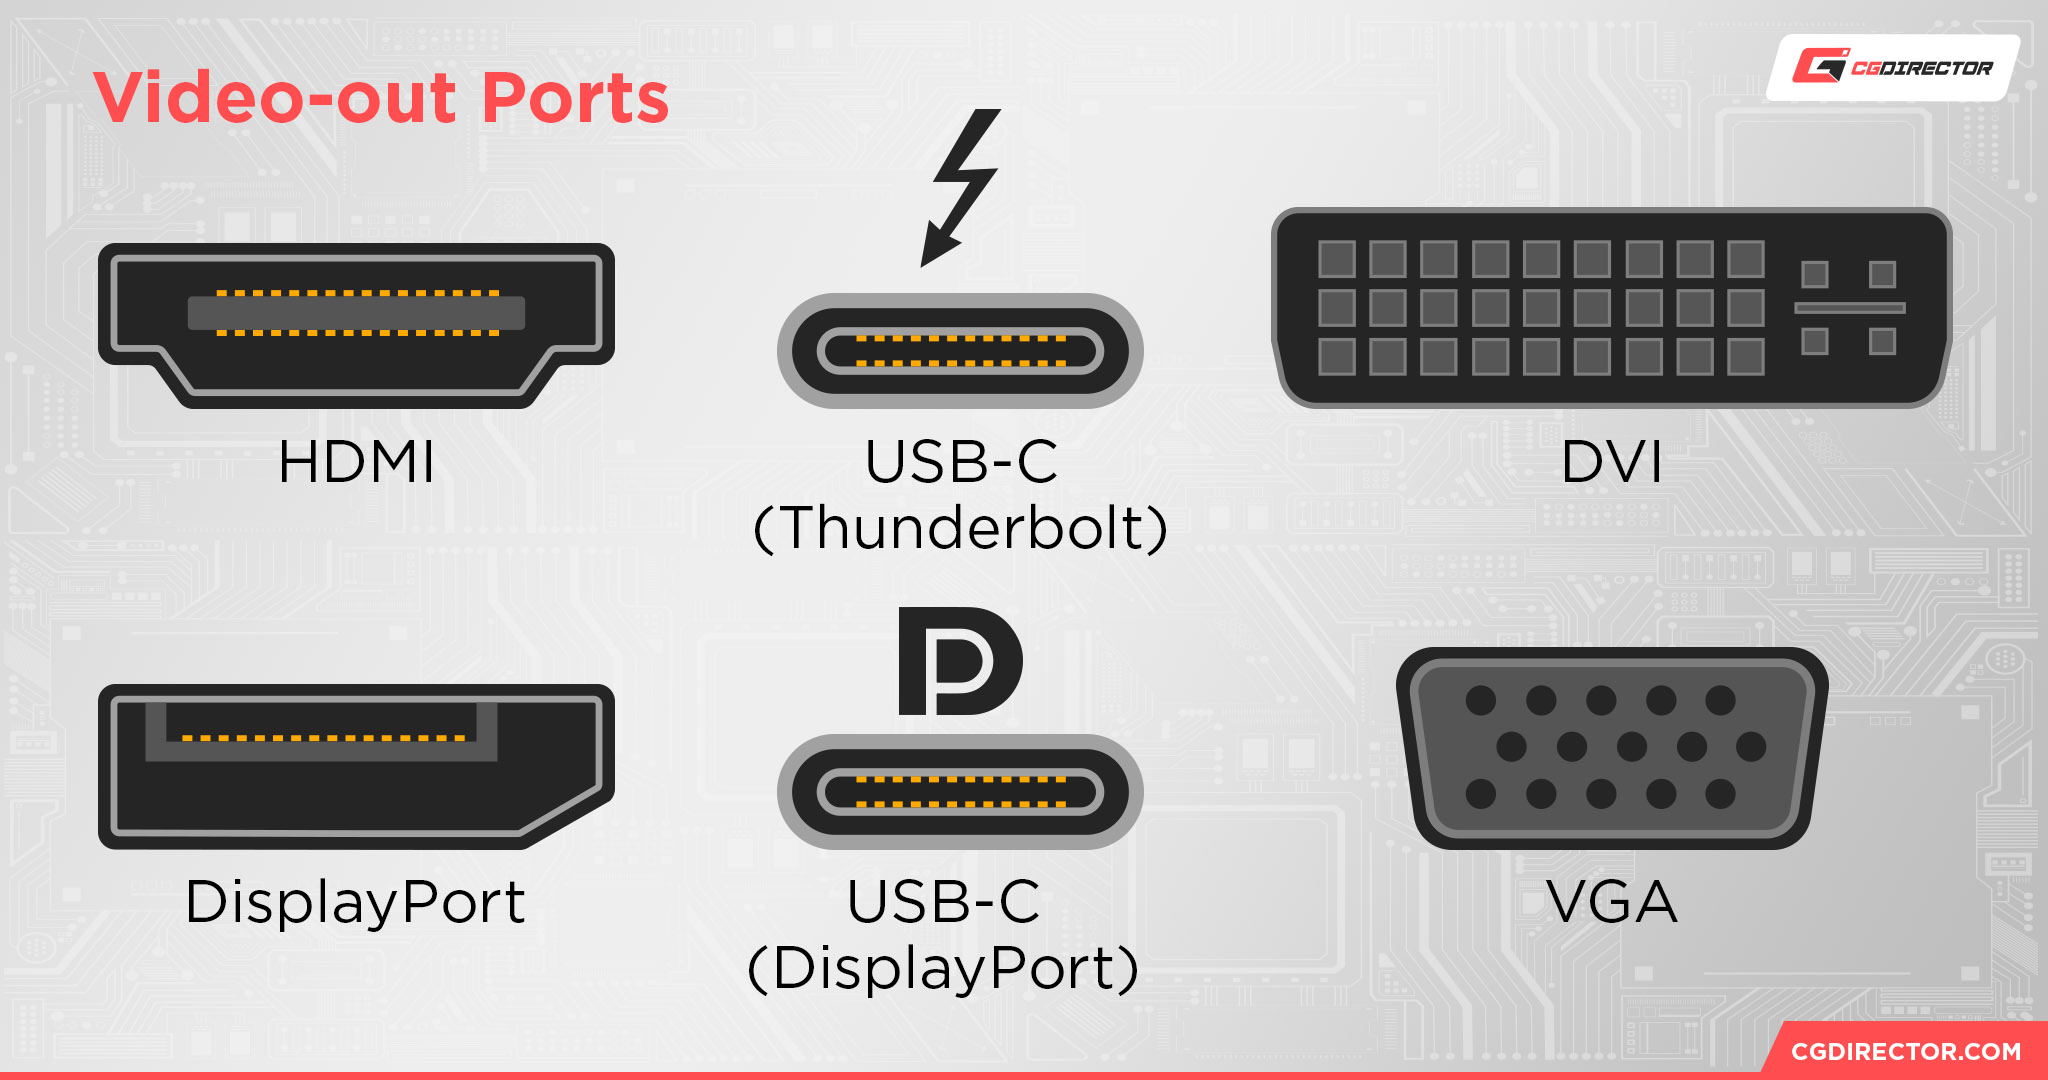 Video-out Ports